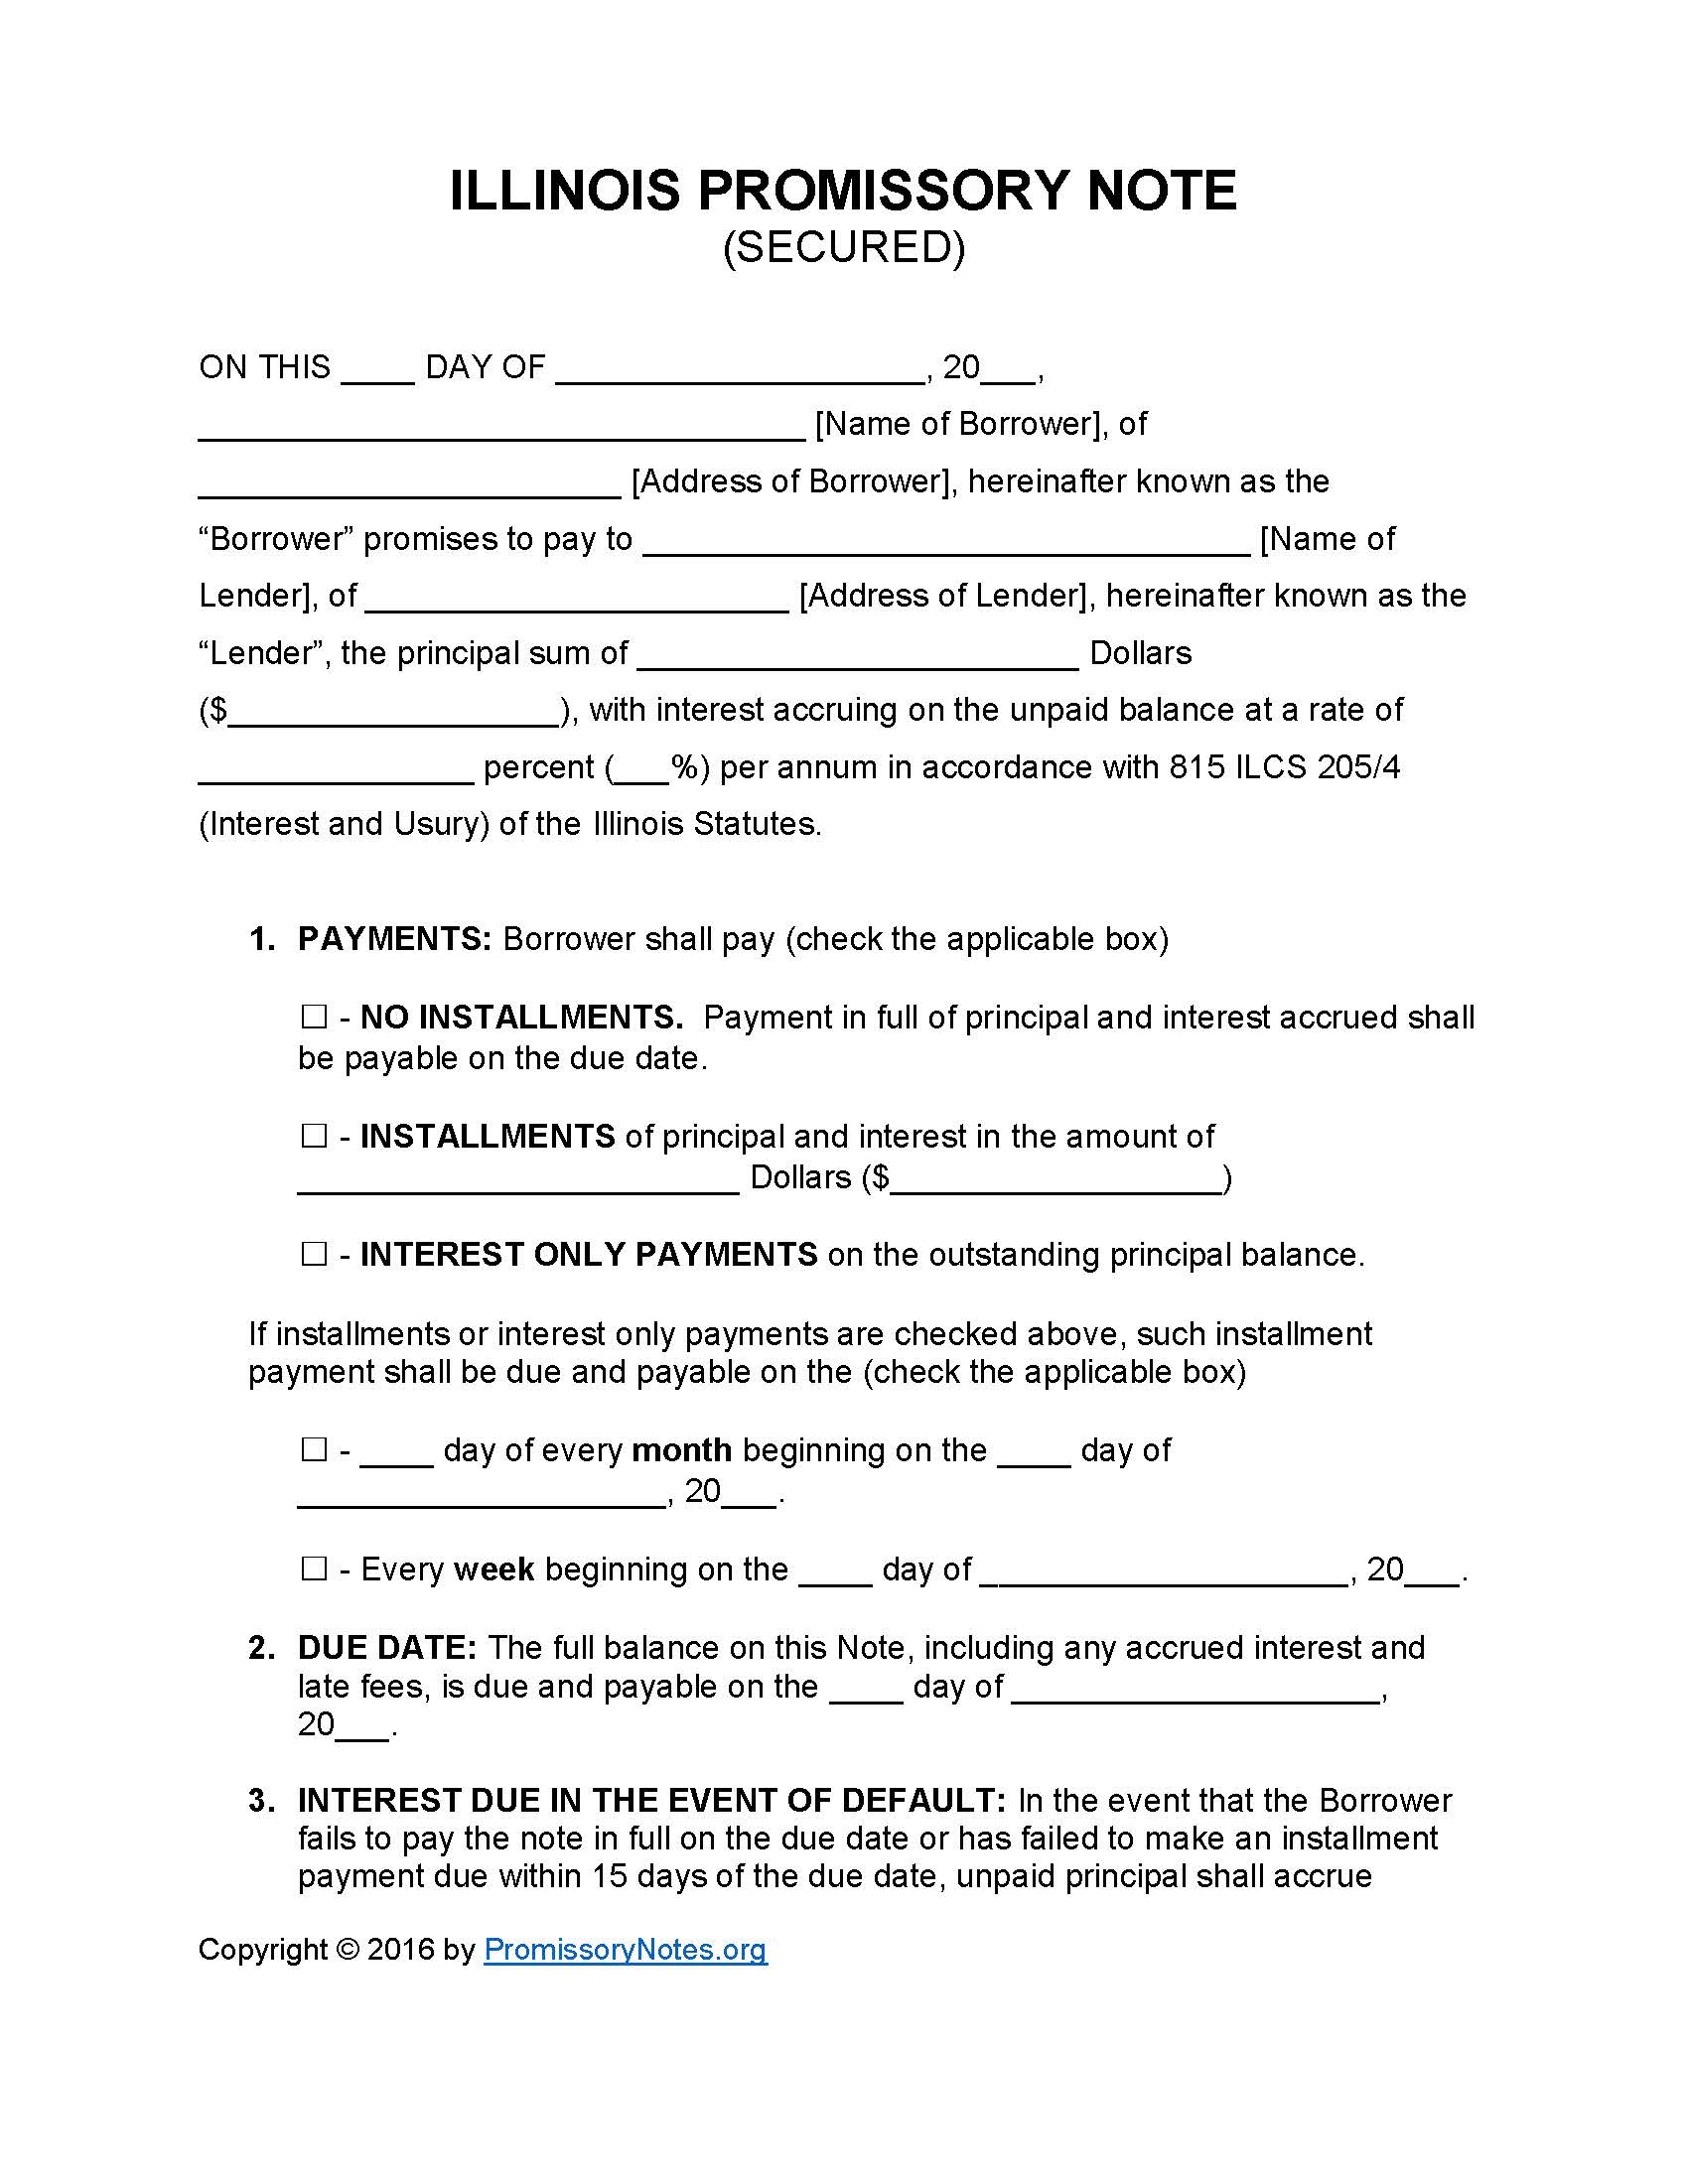 Illinois Secured Promissory Note Template Promissory Notes Promissory Notes